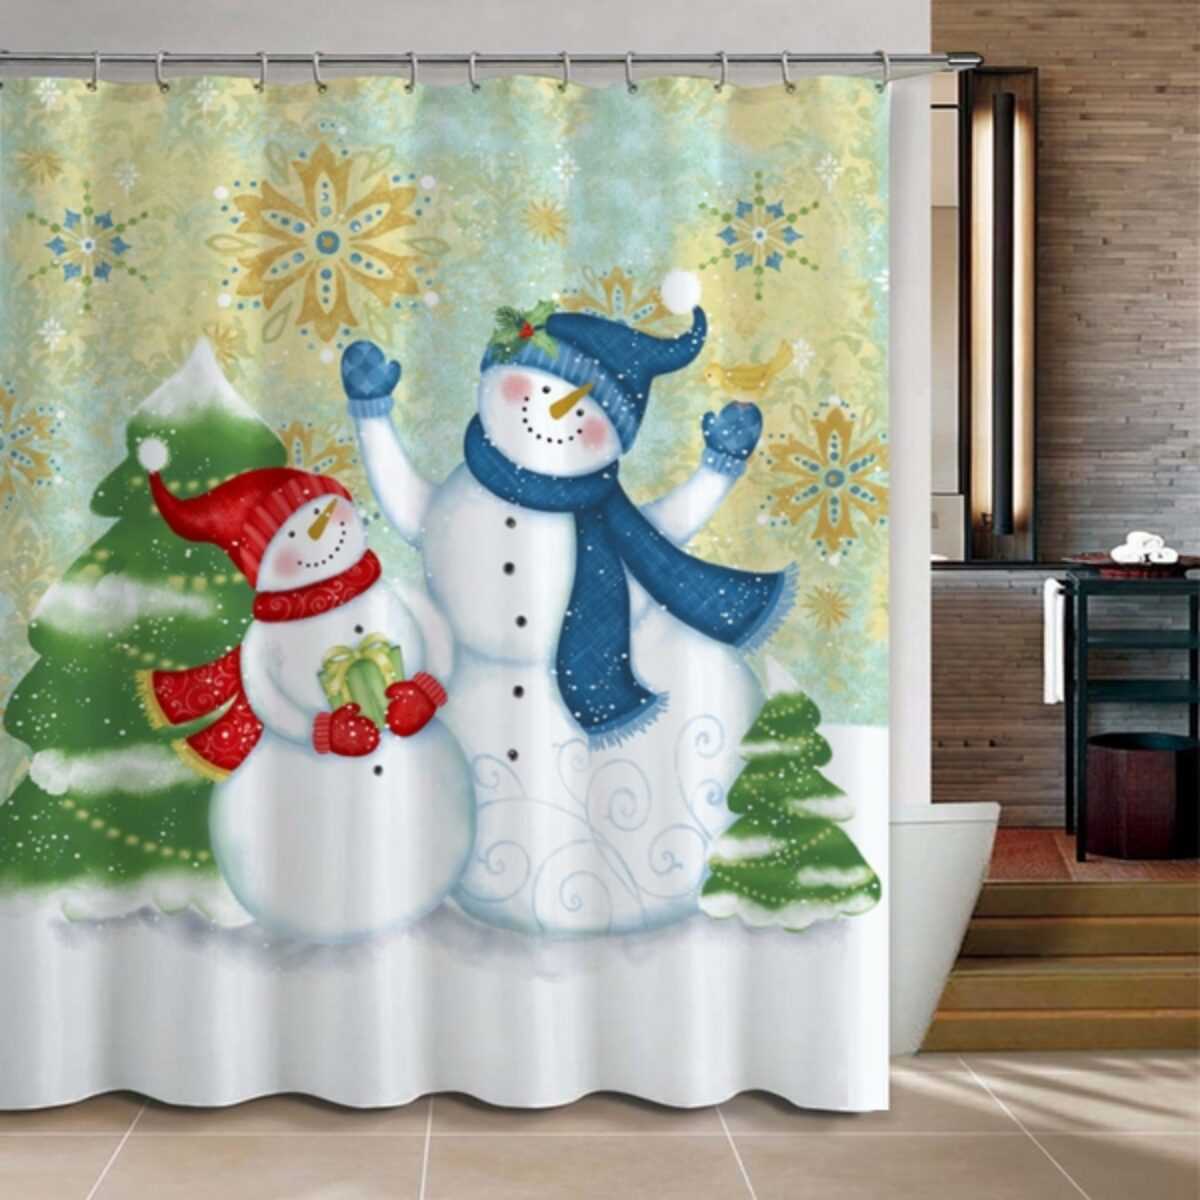 Details about   Baccessor Santa Claus Shower Curtain Merry Christmas Winter Holiday New Year Xma 